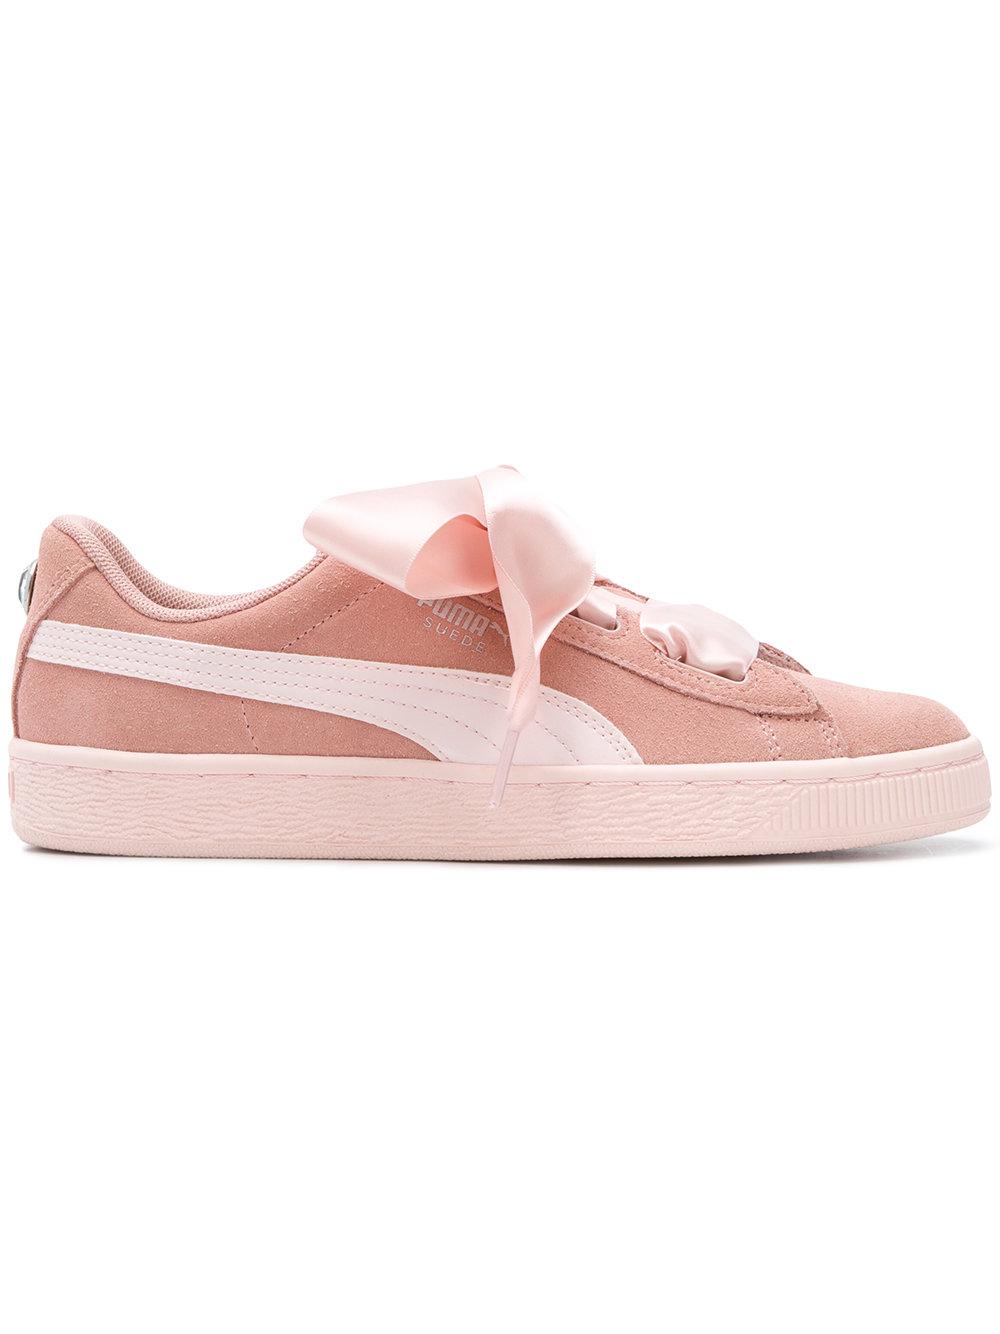 PUMA Leather Ribbon Lace-up Sneakers in 